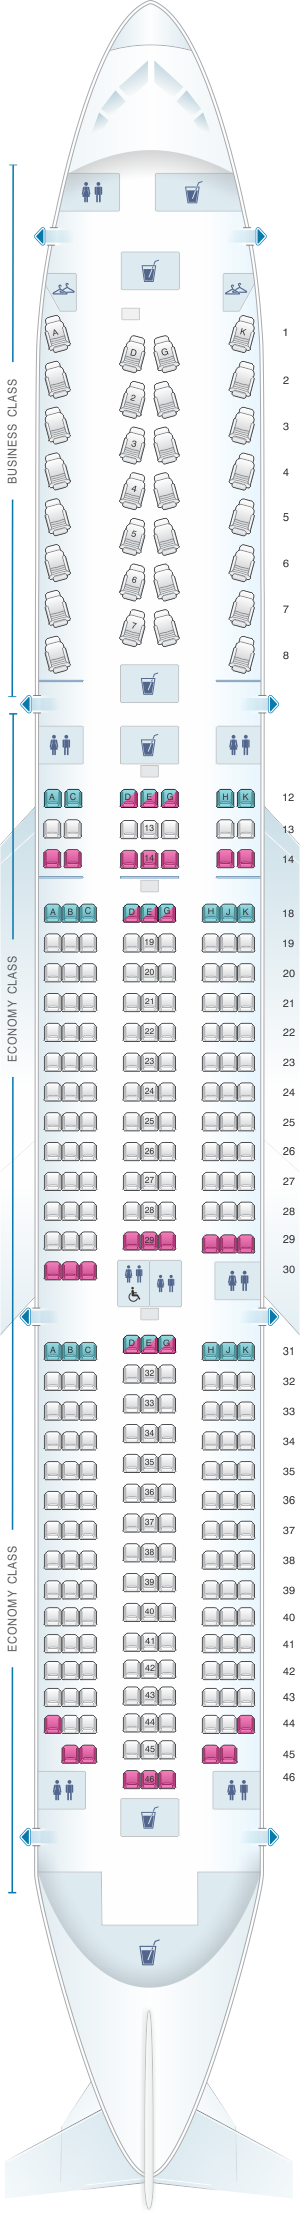 Seat map for Air Canada Boeing B787-9 (789) North America